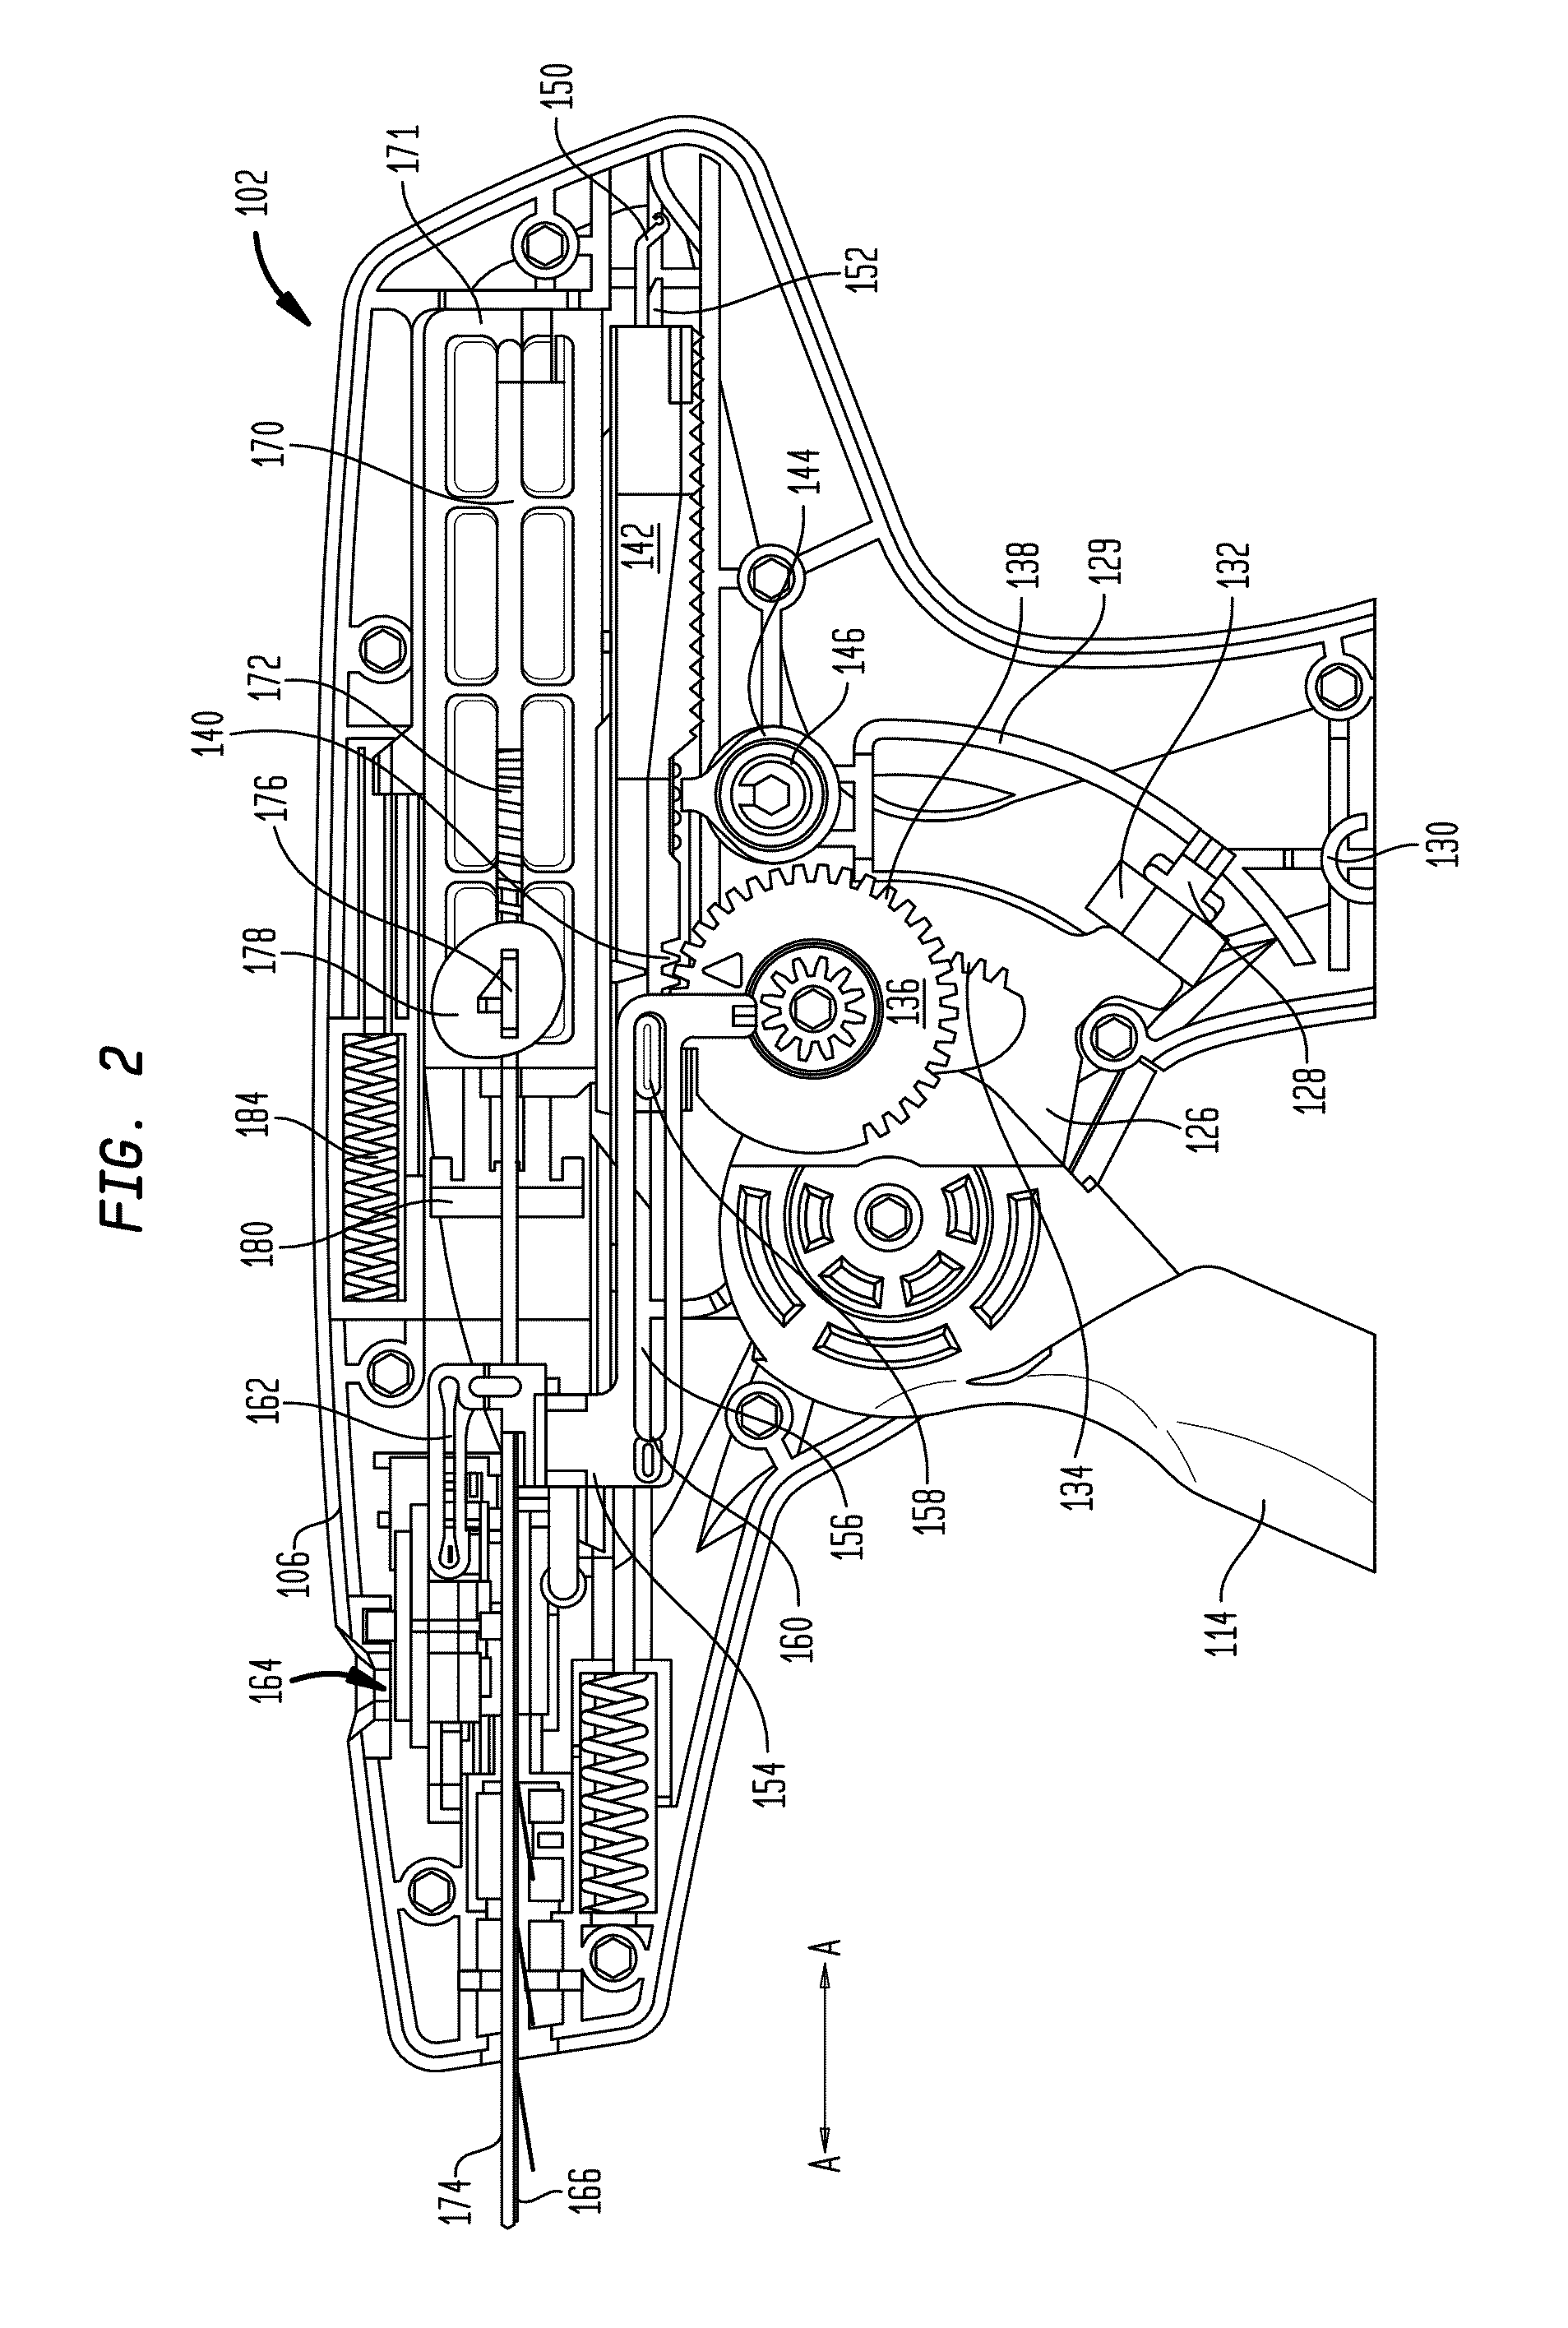 Applicator instruments having curved and articulating shafts for deploying surgical fasteners and methods therefor